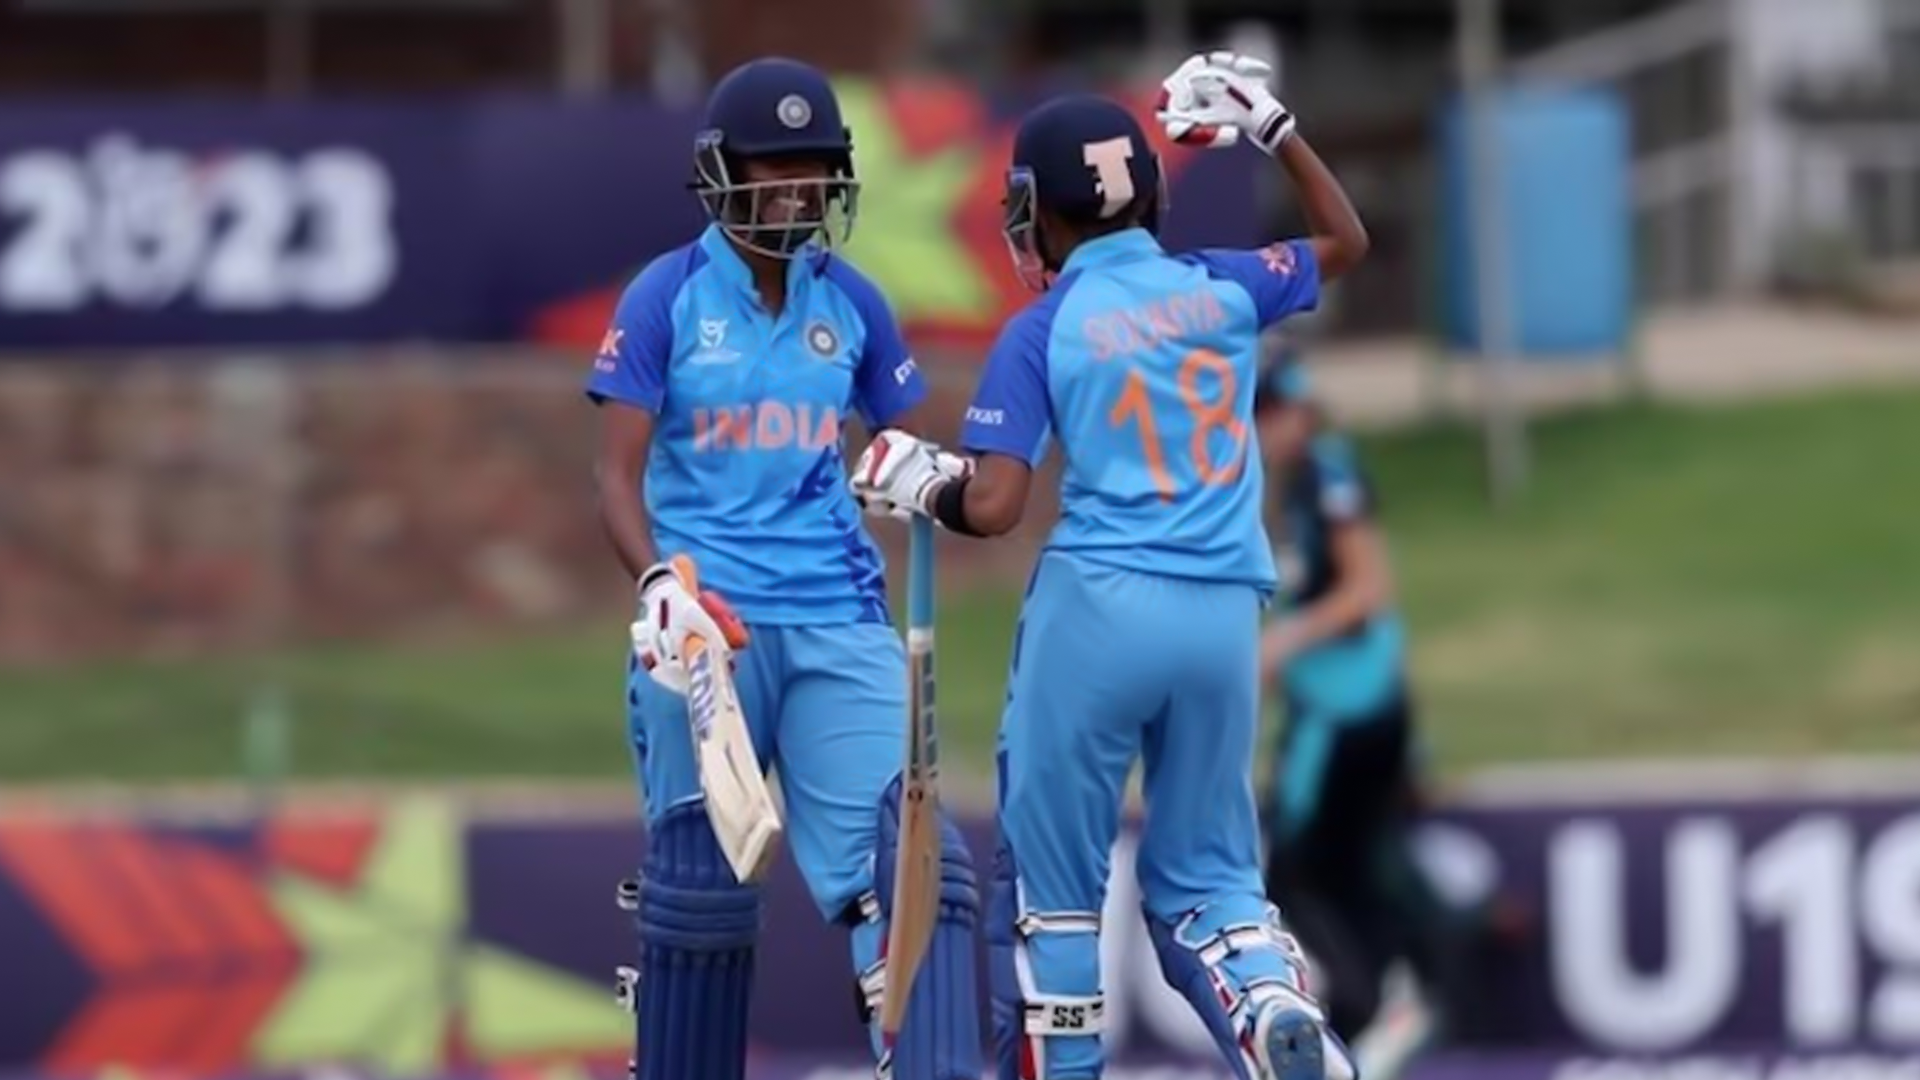 Amazing Performance Of Shweta And Parshvi Helped Indian Team To Enter In The Finals Of U-19 T20 World Cup